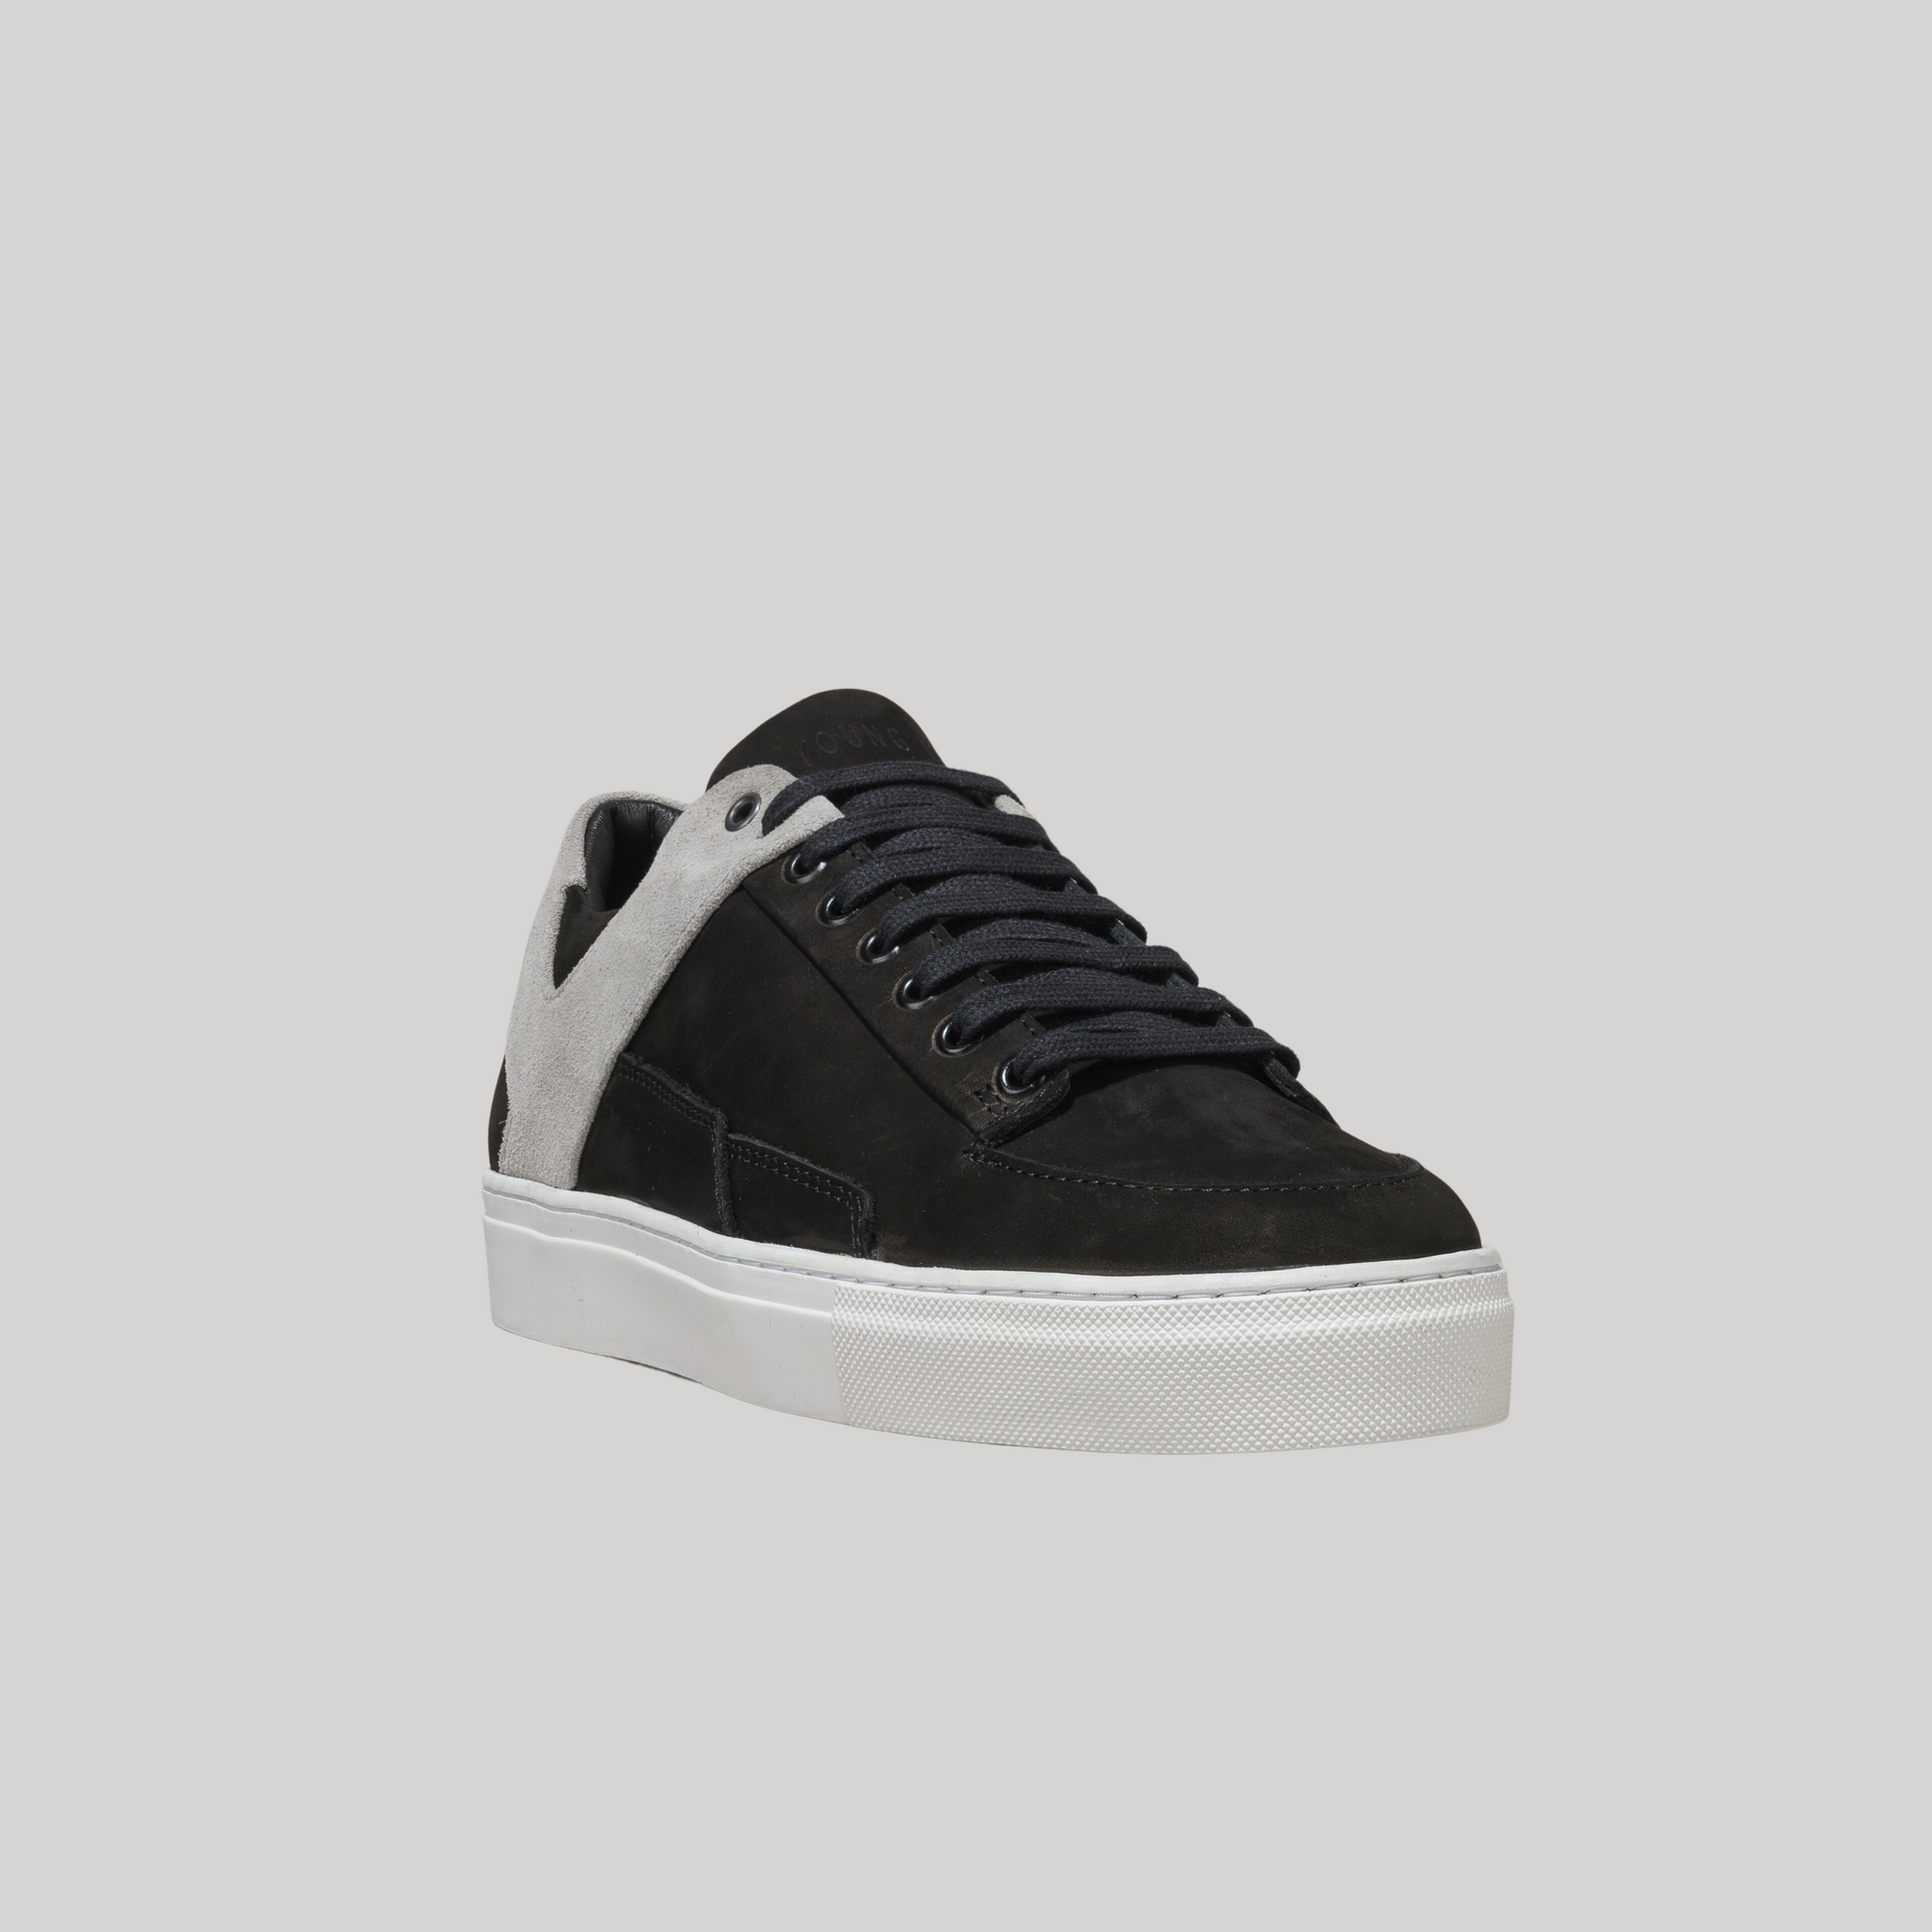 Young Levels - Shadow - Black and Grey Suede Shoe